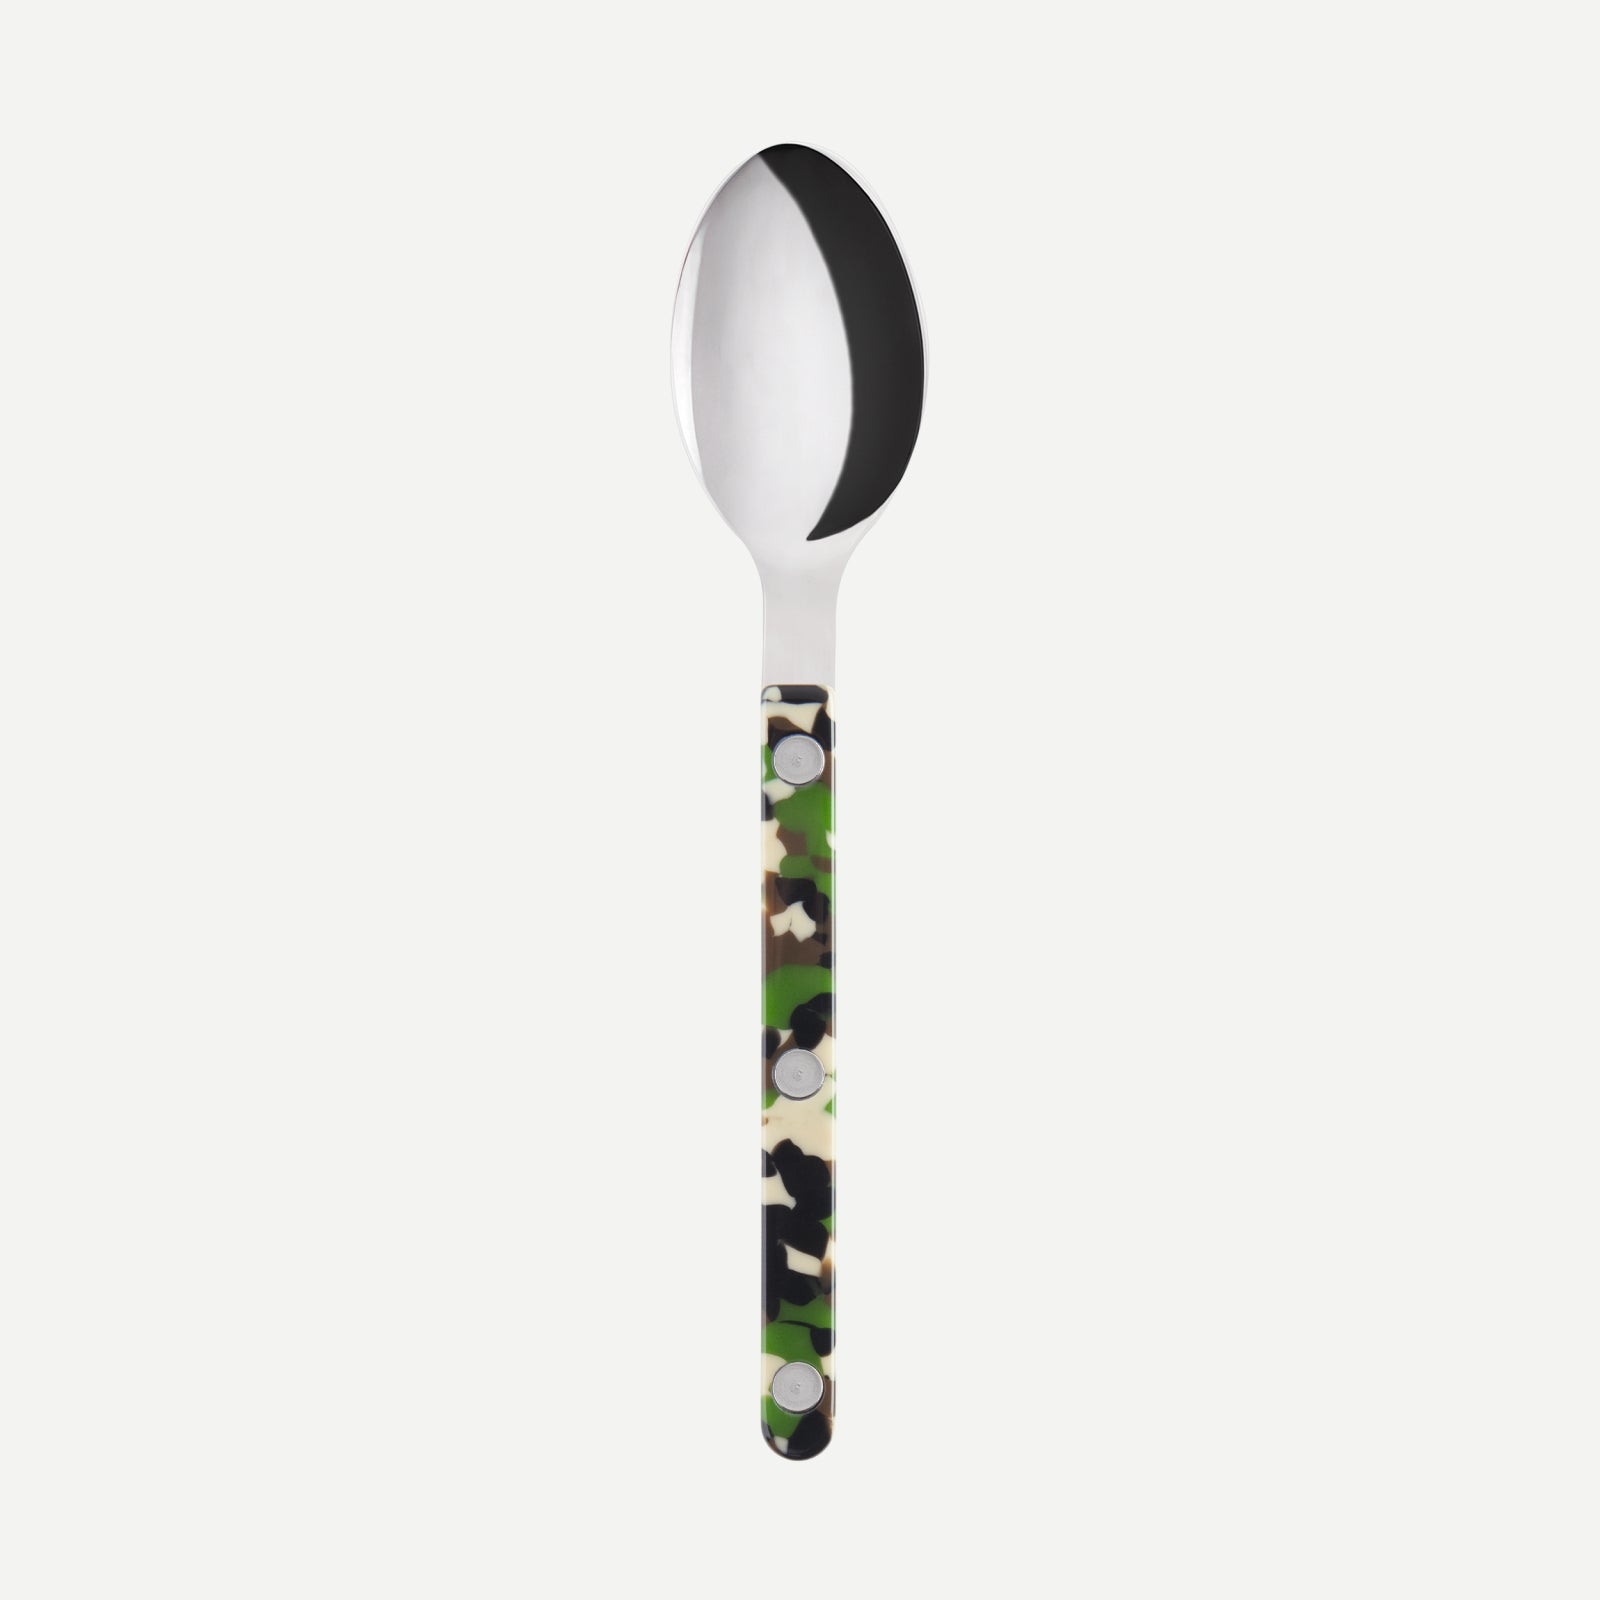 Petite cuillère - Bistrot Camouflage - Vert